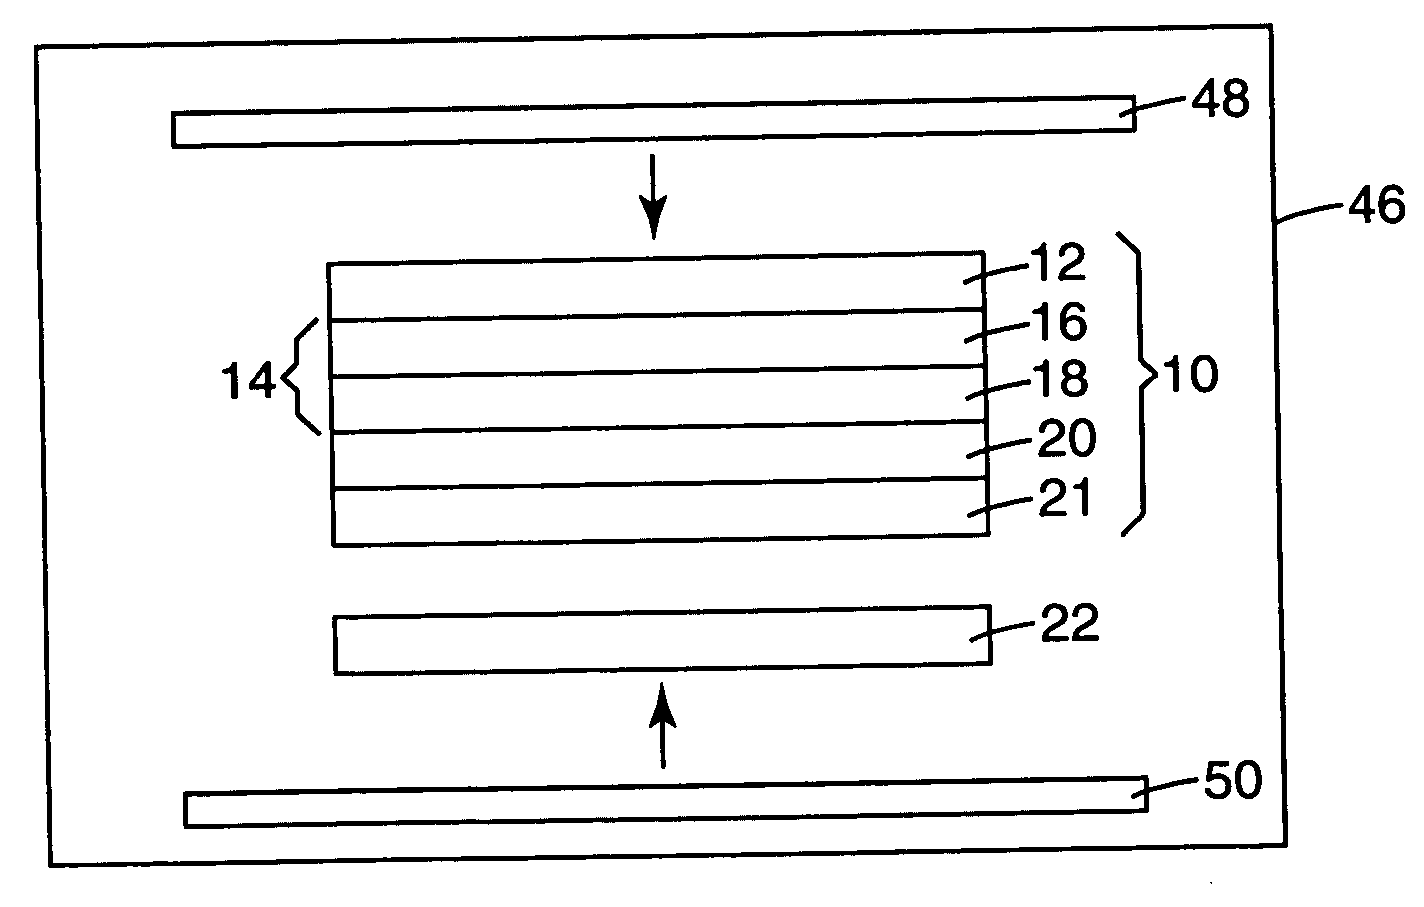 Transferable antireflection material for use on optical display